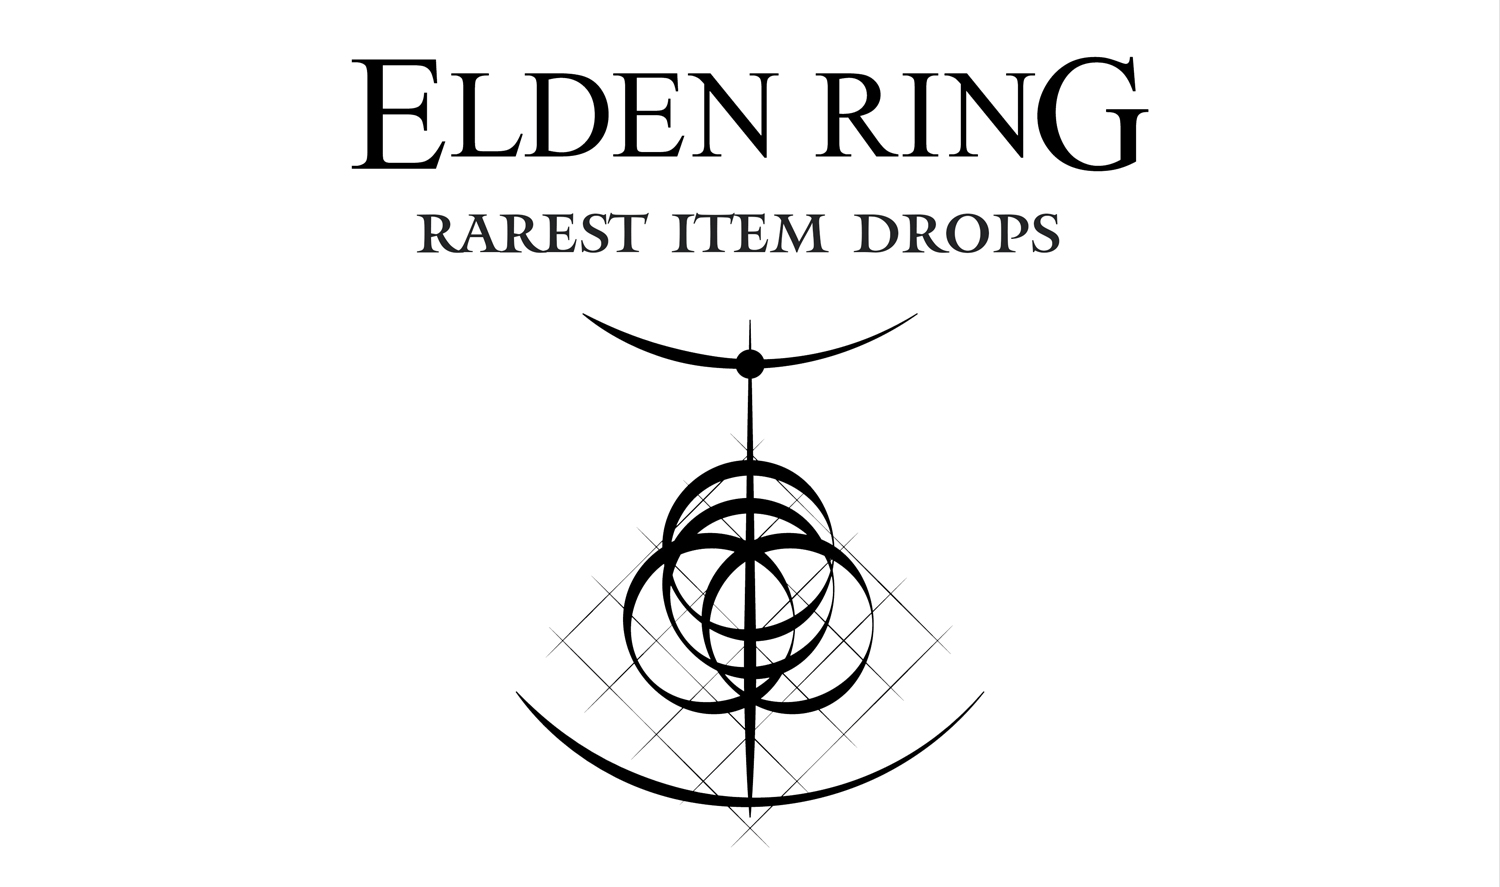 The Rarest item drops Elden Ring (I bet you will be Missing these items!)